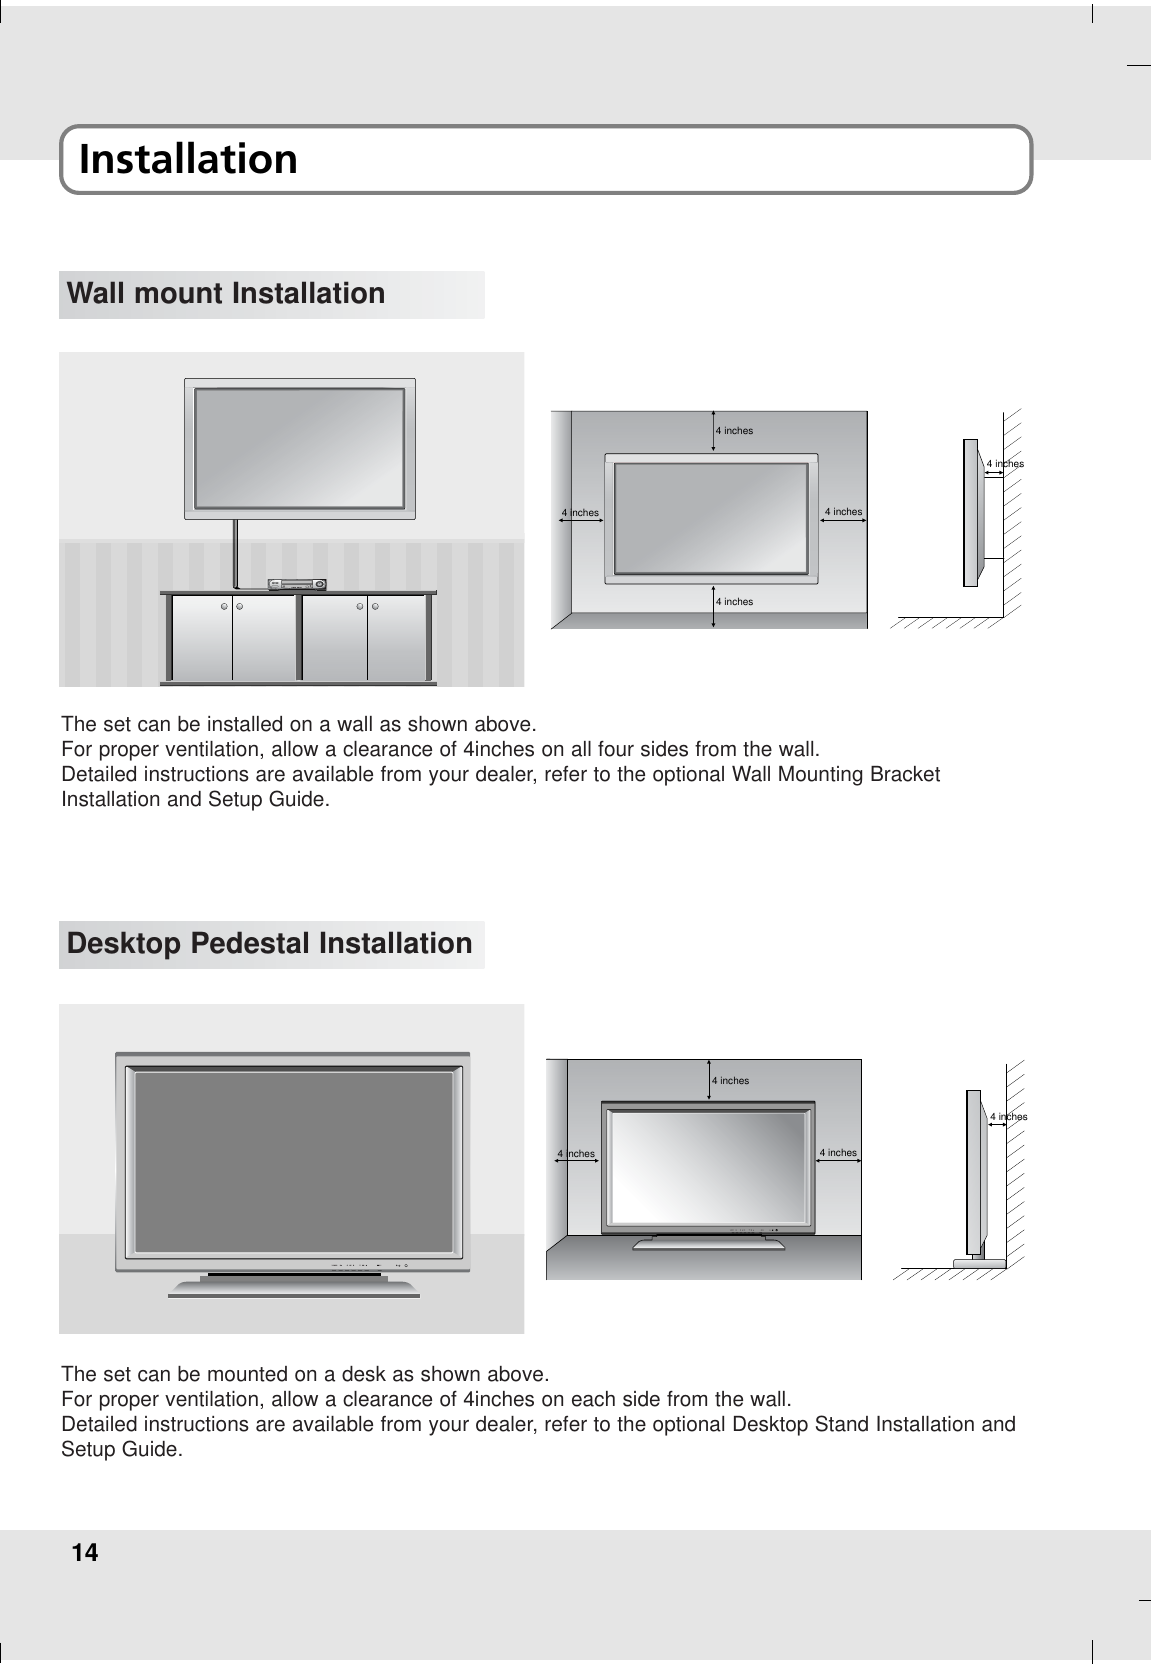 14Installation Wall mount Installation4 inches4 inches4 inches4 inches4 inchesThe set can be installed on a wall as shown above.For proper ventilation, allow a clearance of 4inches on all four sides from the wall.Detailed instructions are available from your dealer, refer to the optional Wall Mounting BracketInstallation and Setup Guide.Desktop Pedestal Installation4 inches4 inches4 inches4 inchesThe set can be mounted on a desk as shown above.For proper ventilation, allow a clearance of 4inches on each side from the wall.Detailed instructions are available from your dealer, refer to the optional Desktop Stand Installation andSetup Guide.